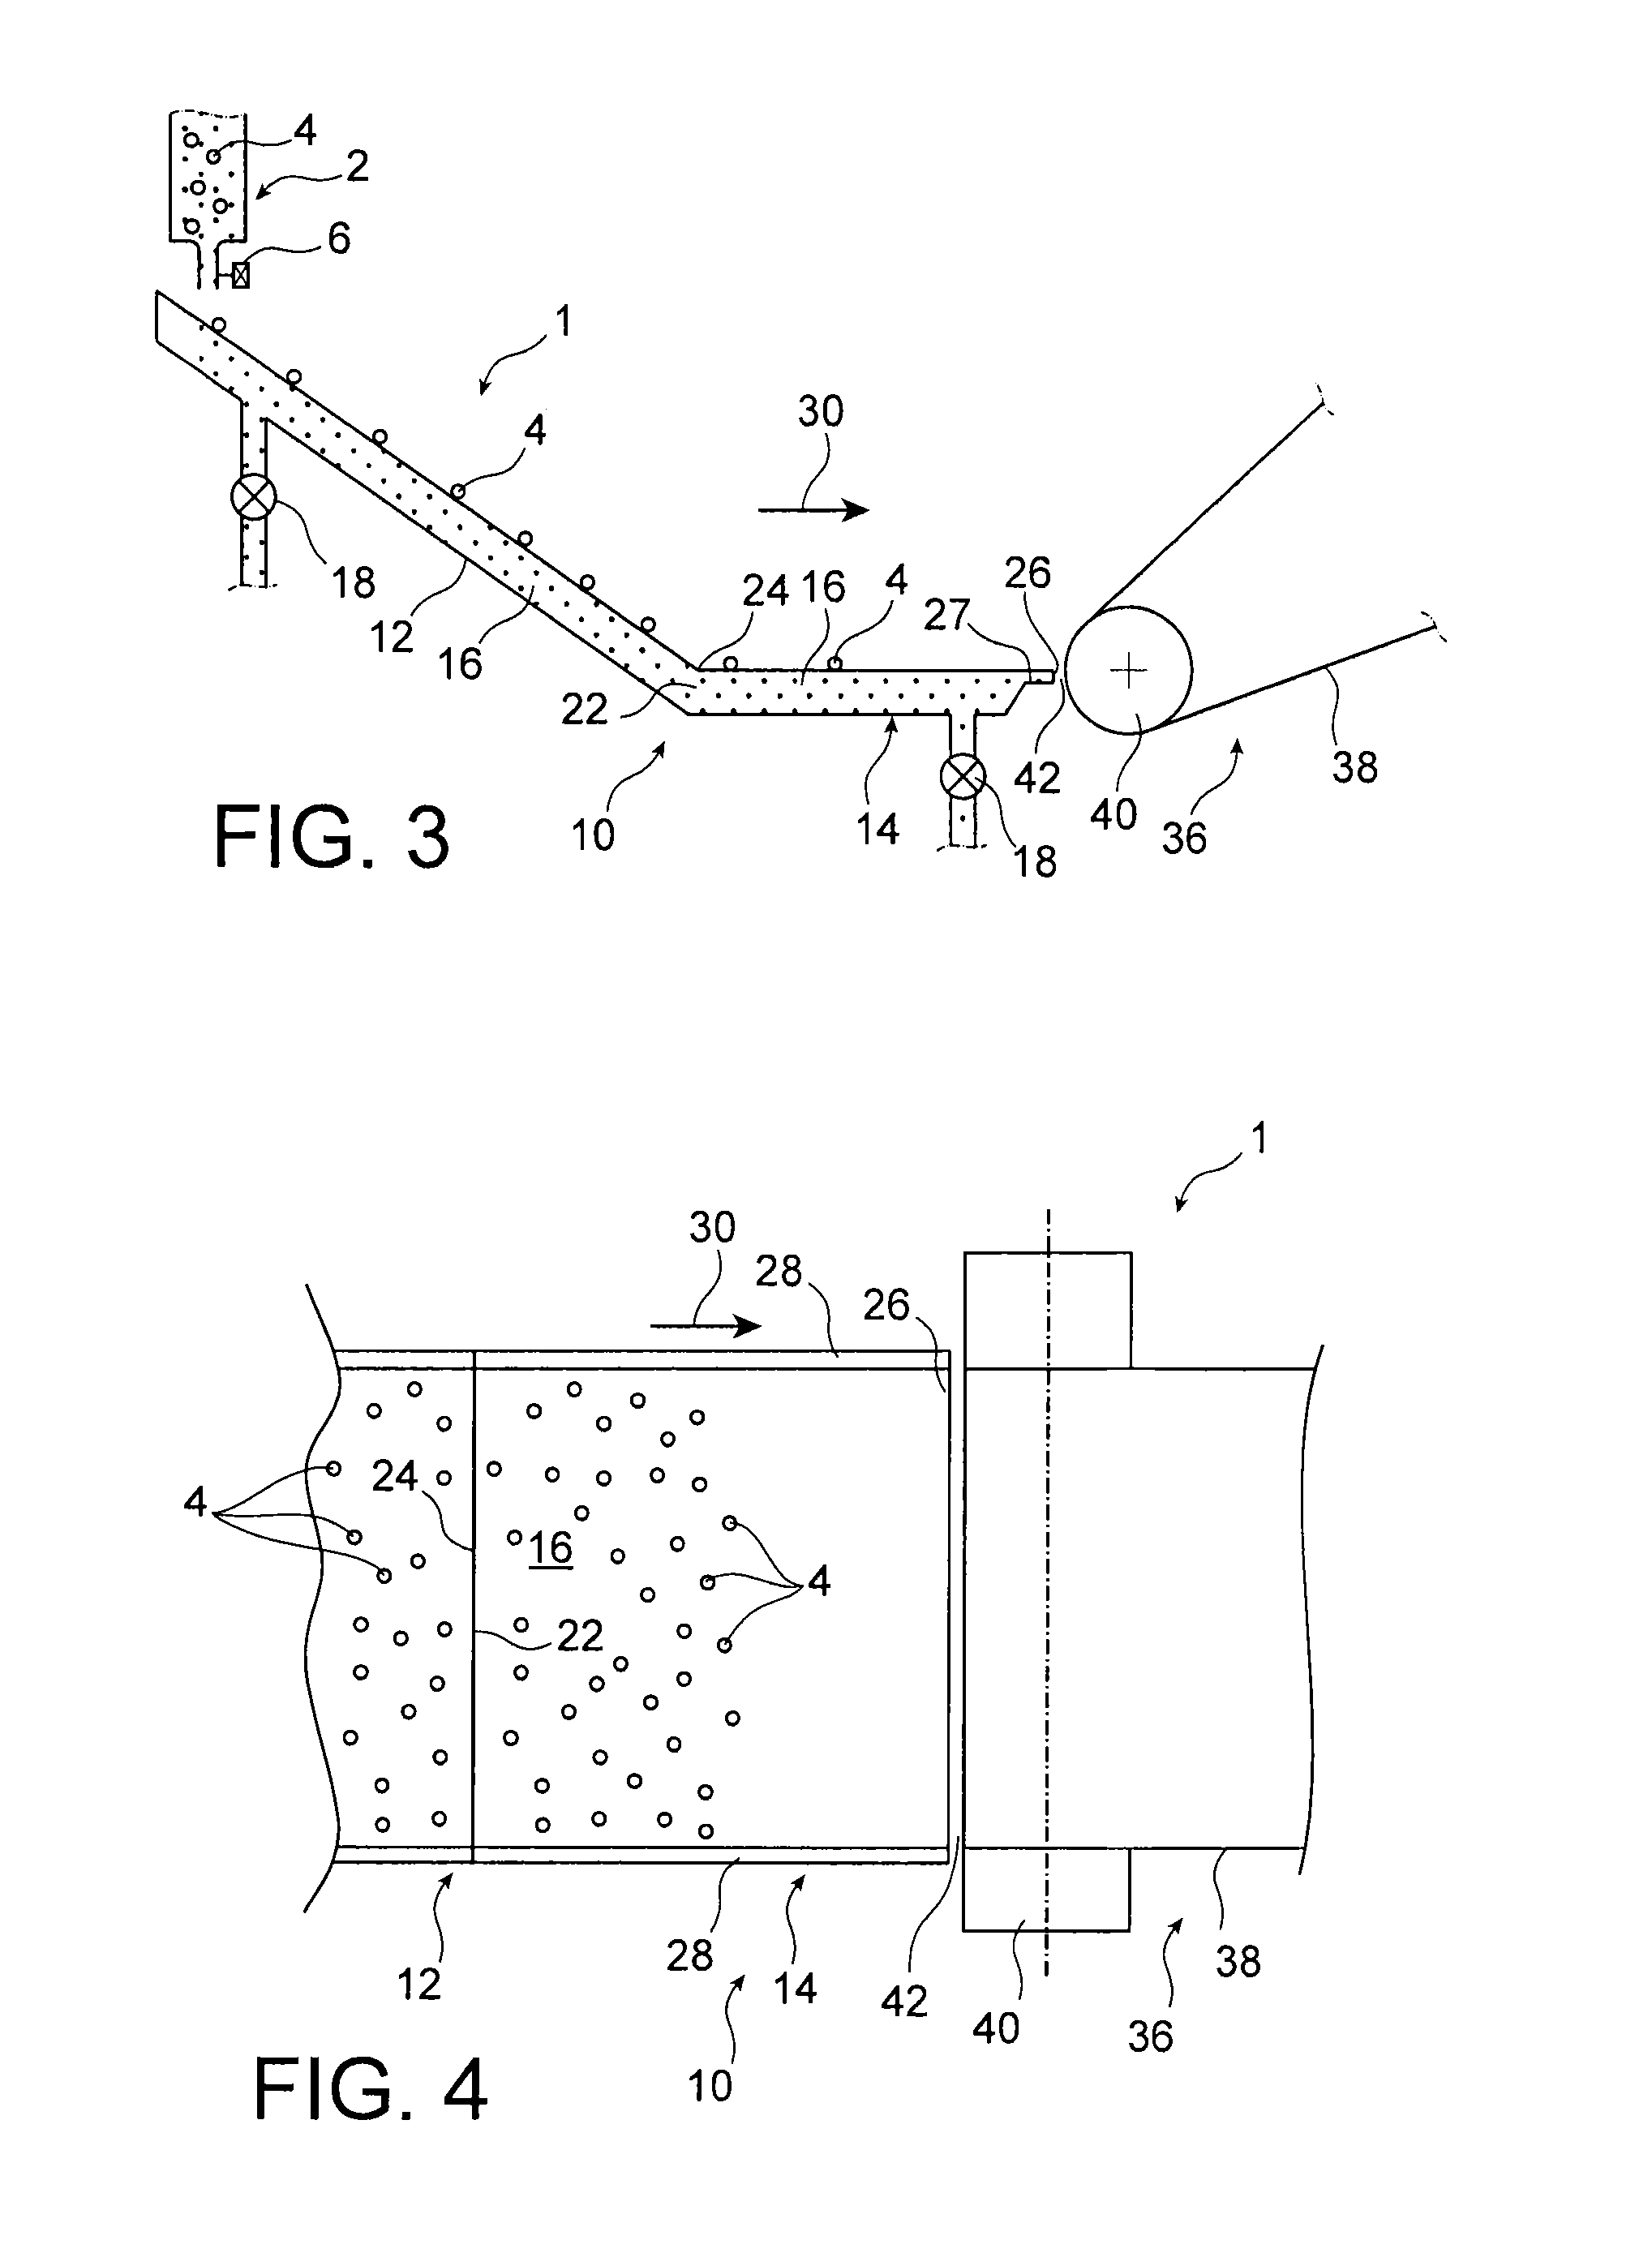 Facility and method for depositing a width adjustable film of ordered particles onto a moving substrate